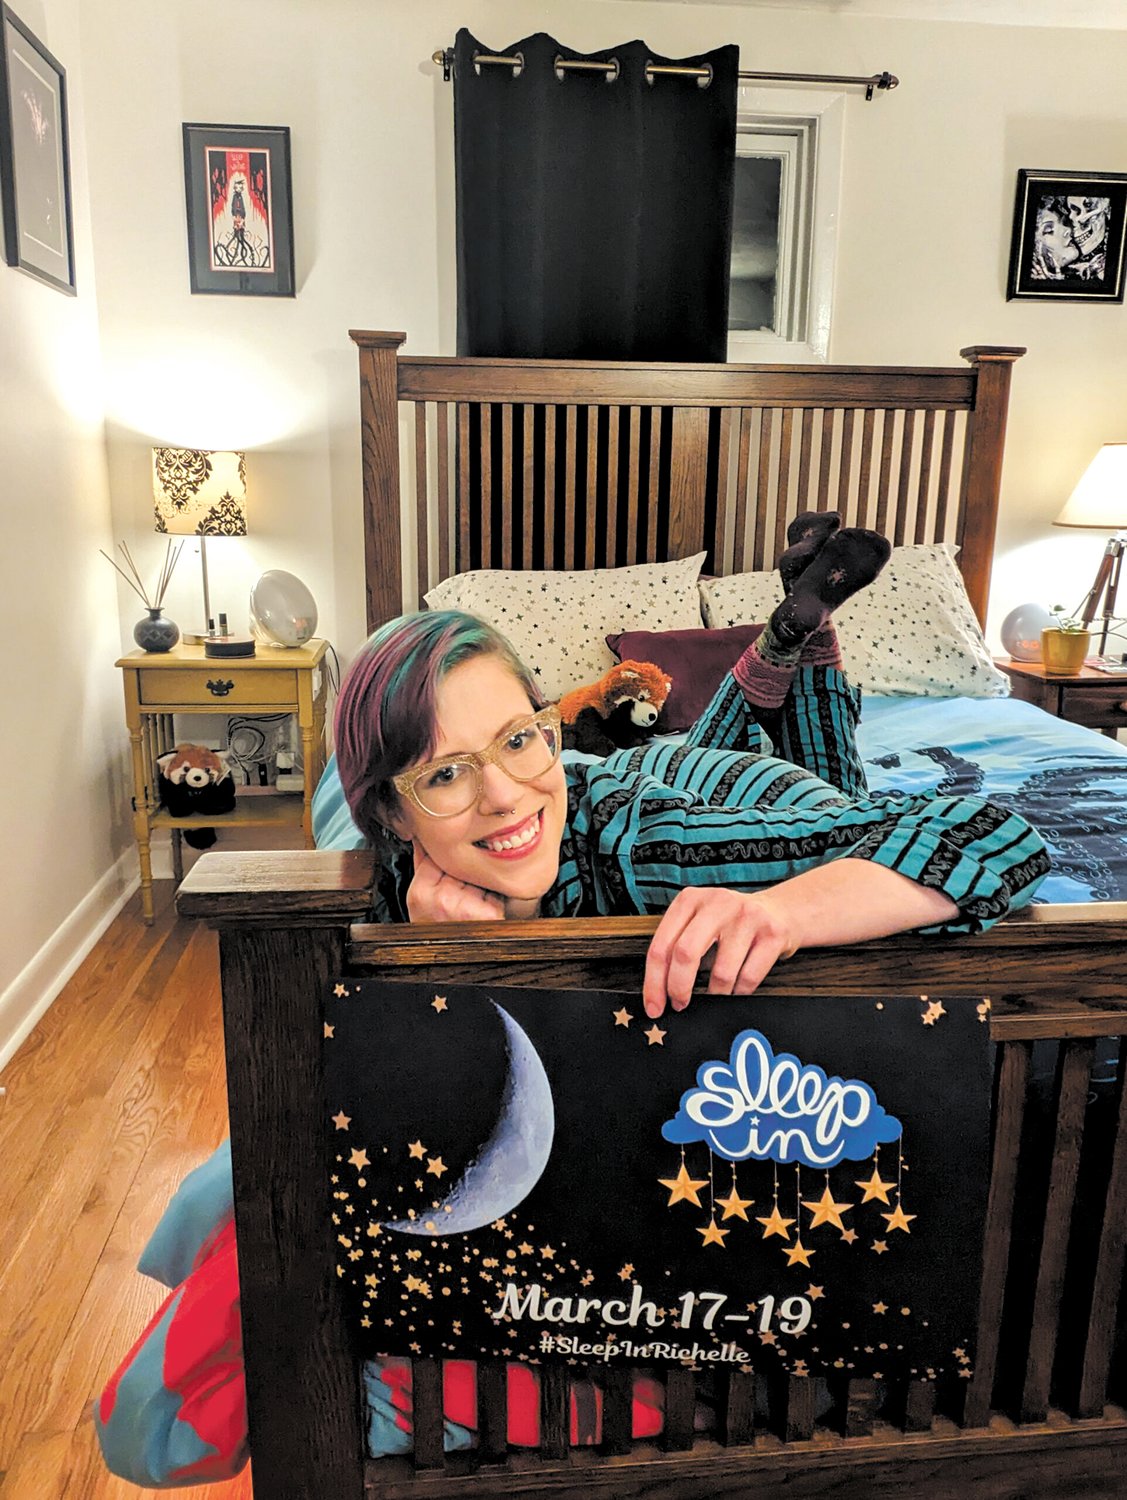 SLEEP IN TO STAND OUT: Richelle spreads word of the event with posts to her website and her own hashtag, #SleepInRichelle (Photo courtesy of Richelle Topping)